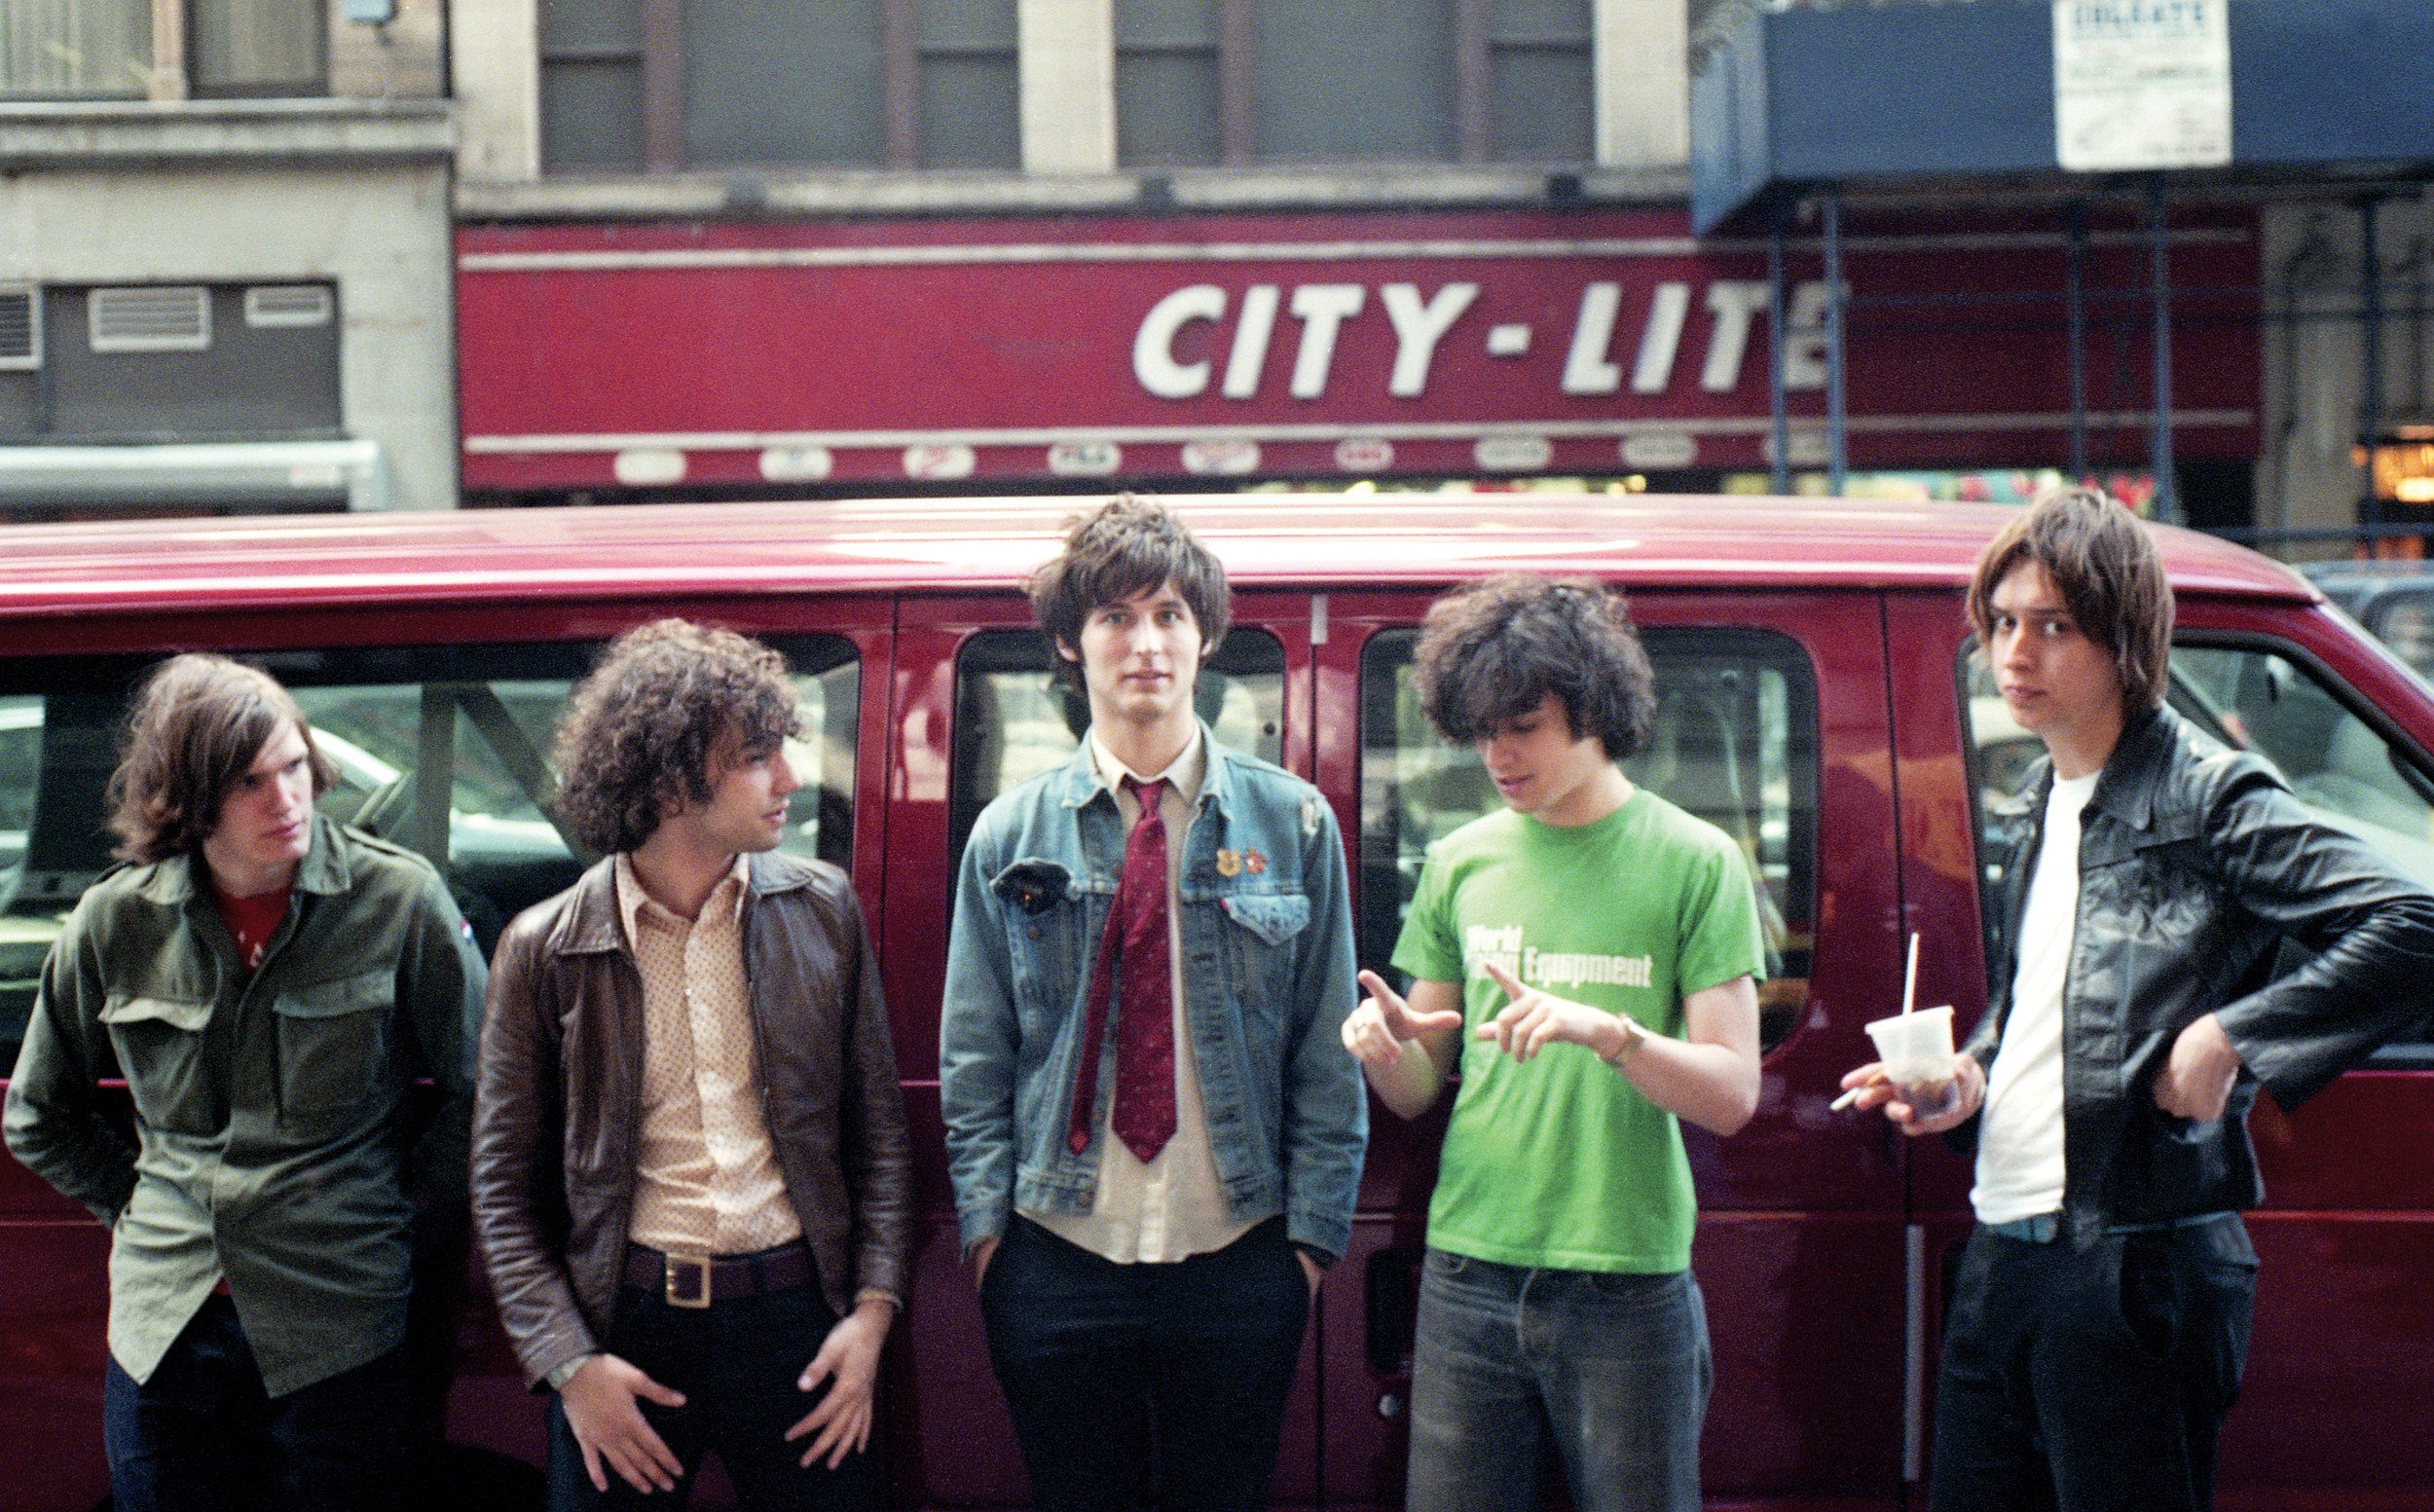 Preview <i></noscript>The Strokes: The First Ten Years</i>, a New Photo Collection of Their Early Days” title=”1927-copy-1504101406″ data-original-id=”255981″ data-adjusted-id=”255981″ class=”sm_size_full_width sm_alignment_center ” data-image-source=”getty” />
<img src=